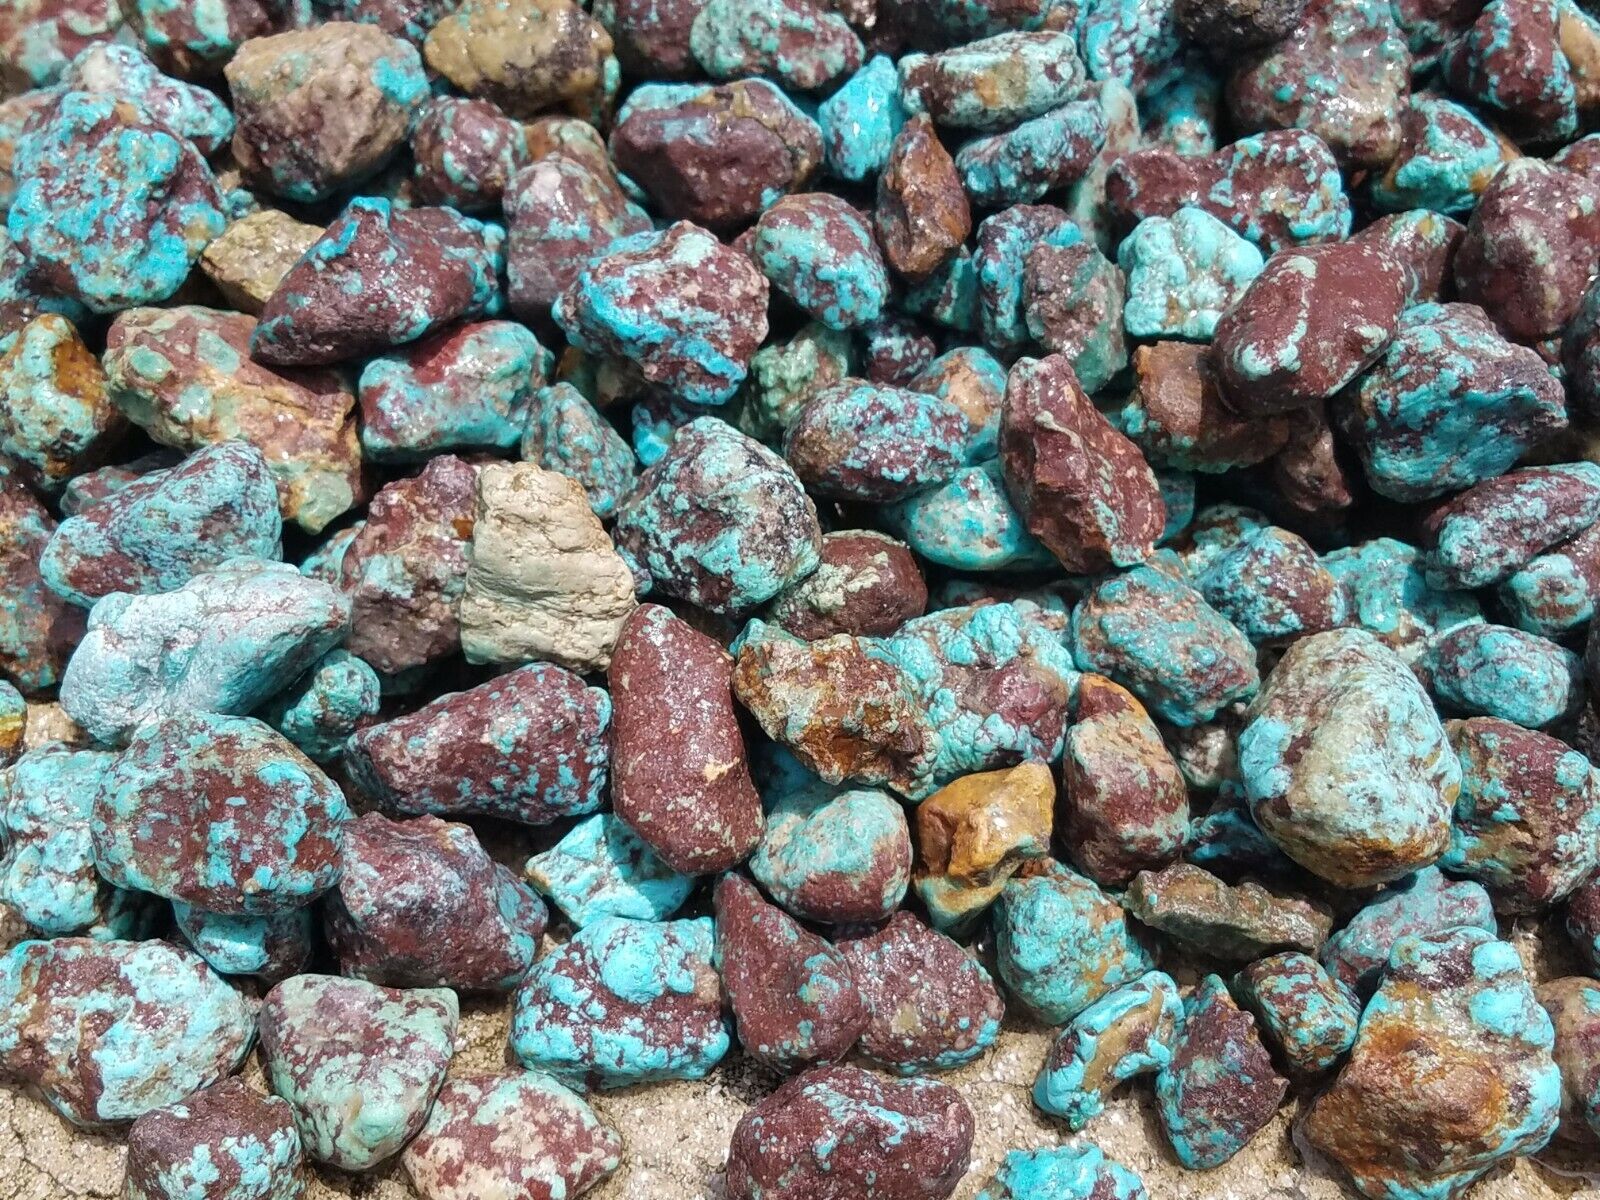 1/2 POUND LOT OF MA'ANSHAN REDSKIN STABILIZED TURQUOISE LAPIDARY ROUGH CHINA